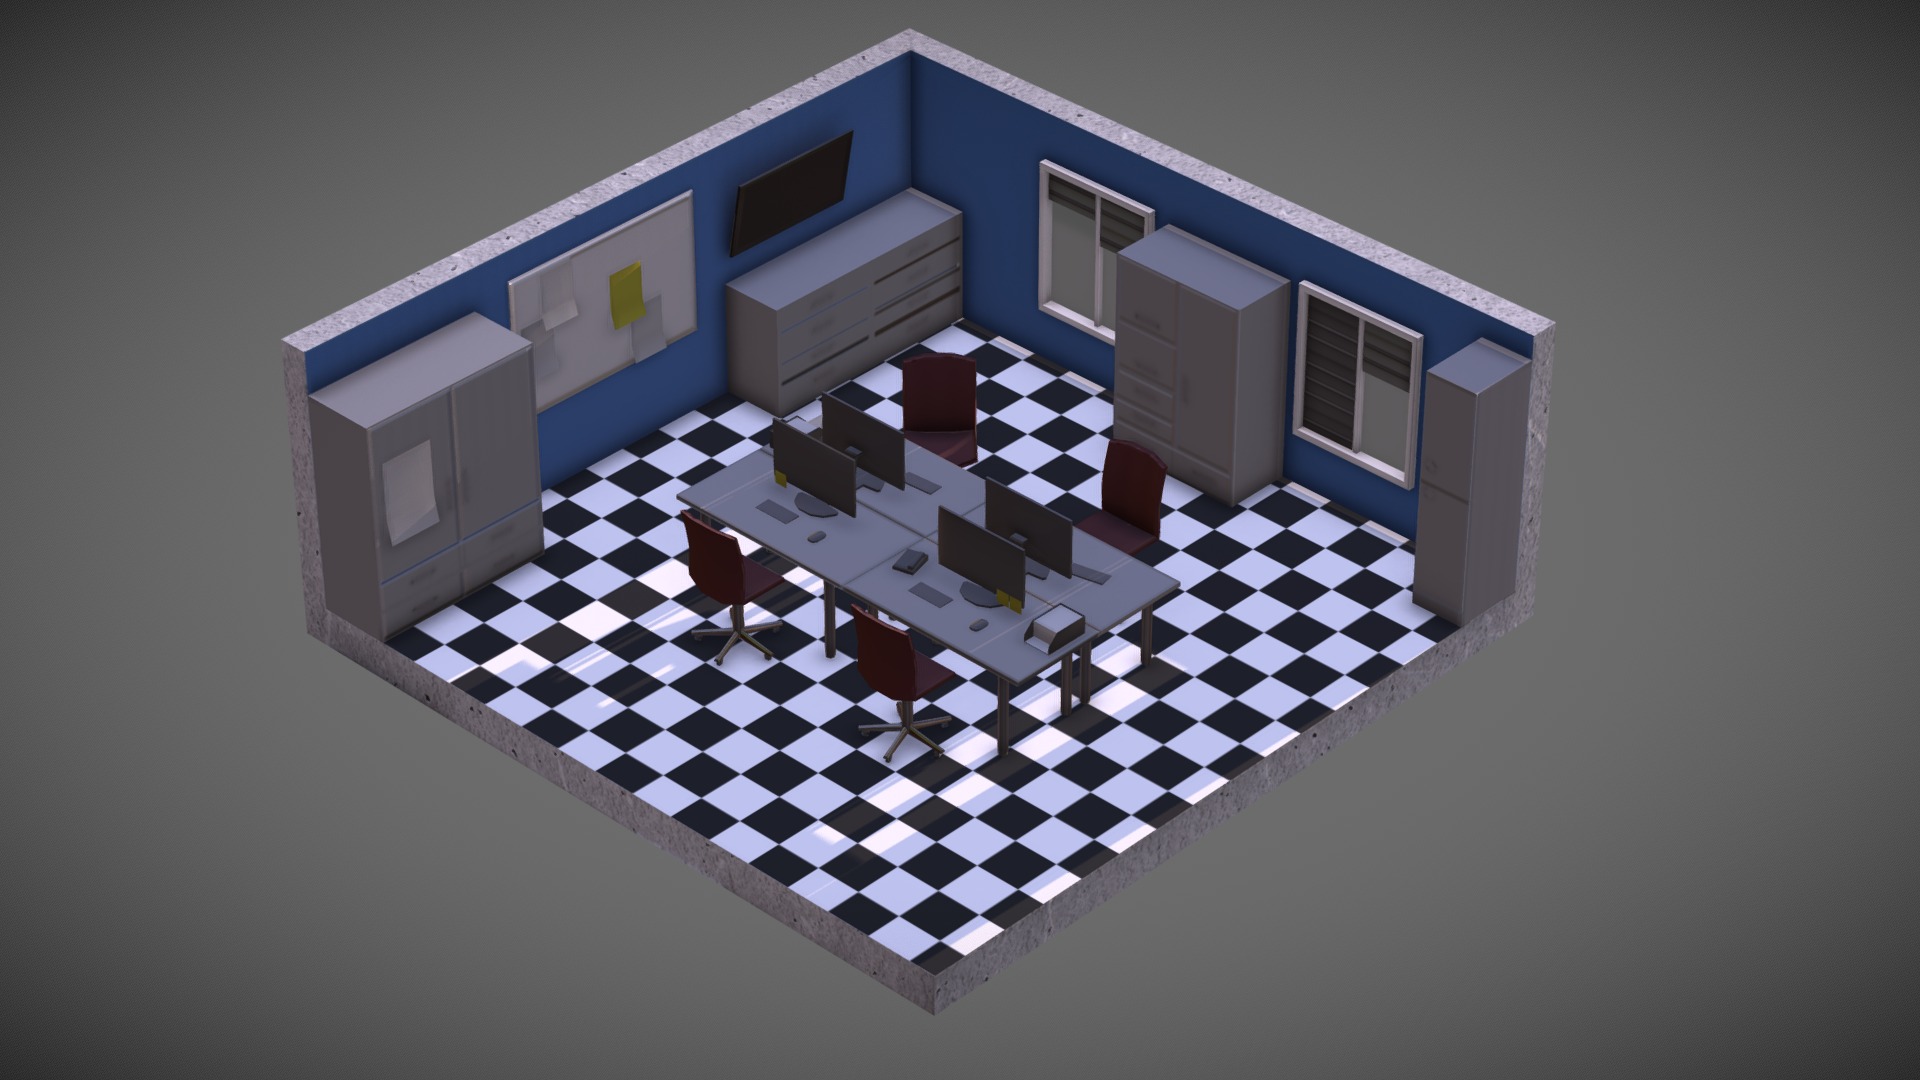 3D model Interior Isometric Design - This is a 3D model of the Interior Isometric Design. The 3D model is about a toy house with a table and chairs.